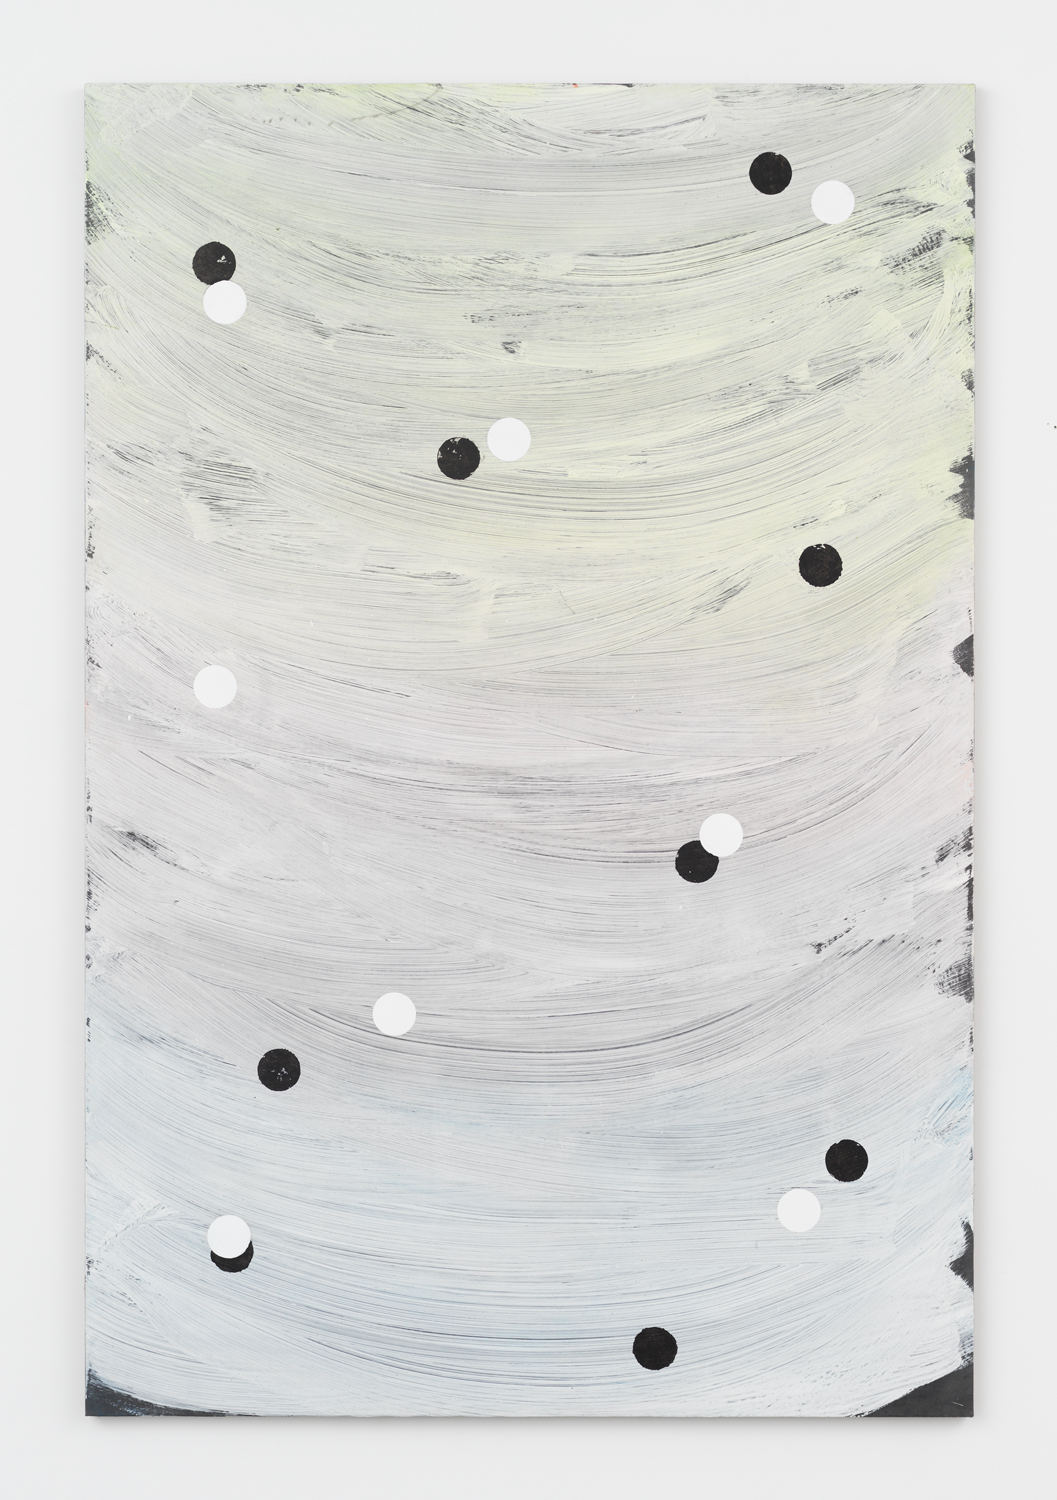 Alex Kwartler, Untitled, 2019, Plaster, acrylic, and oil on linen, 72 x 48 in.